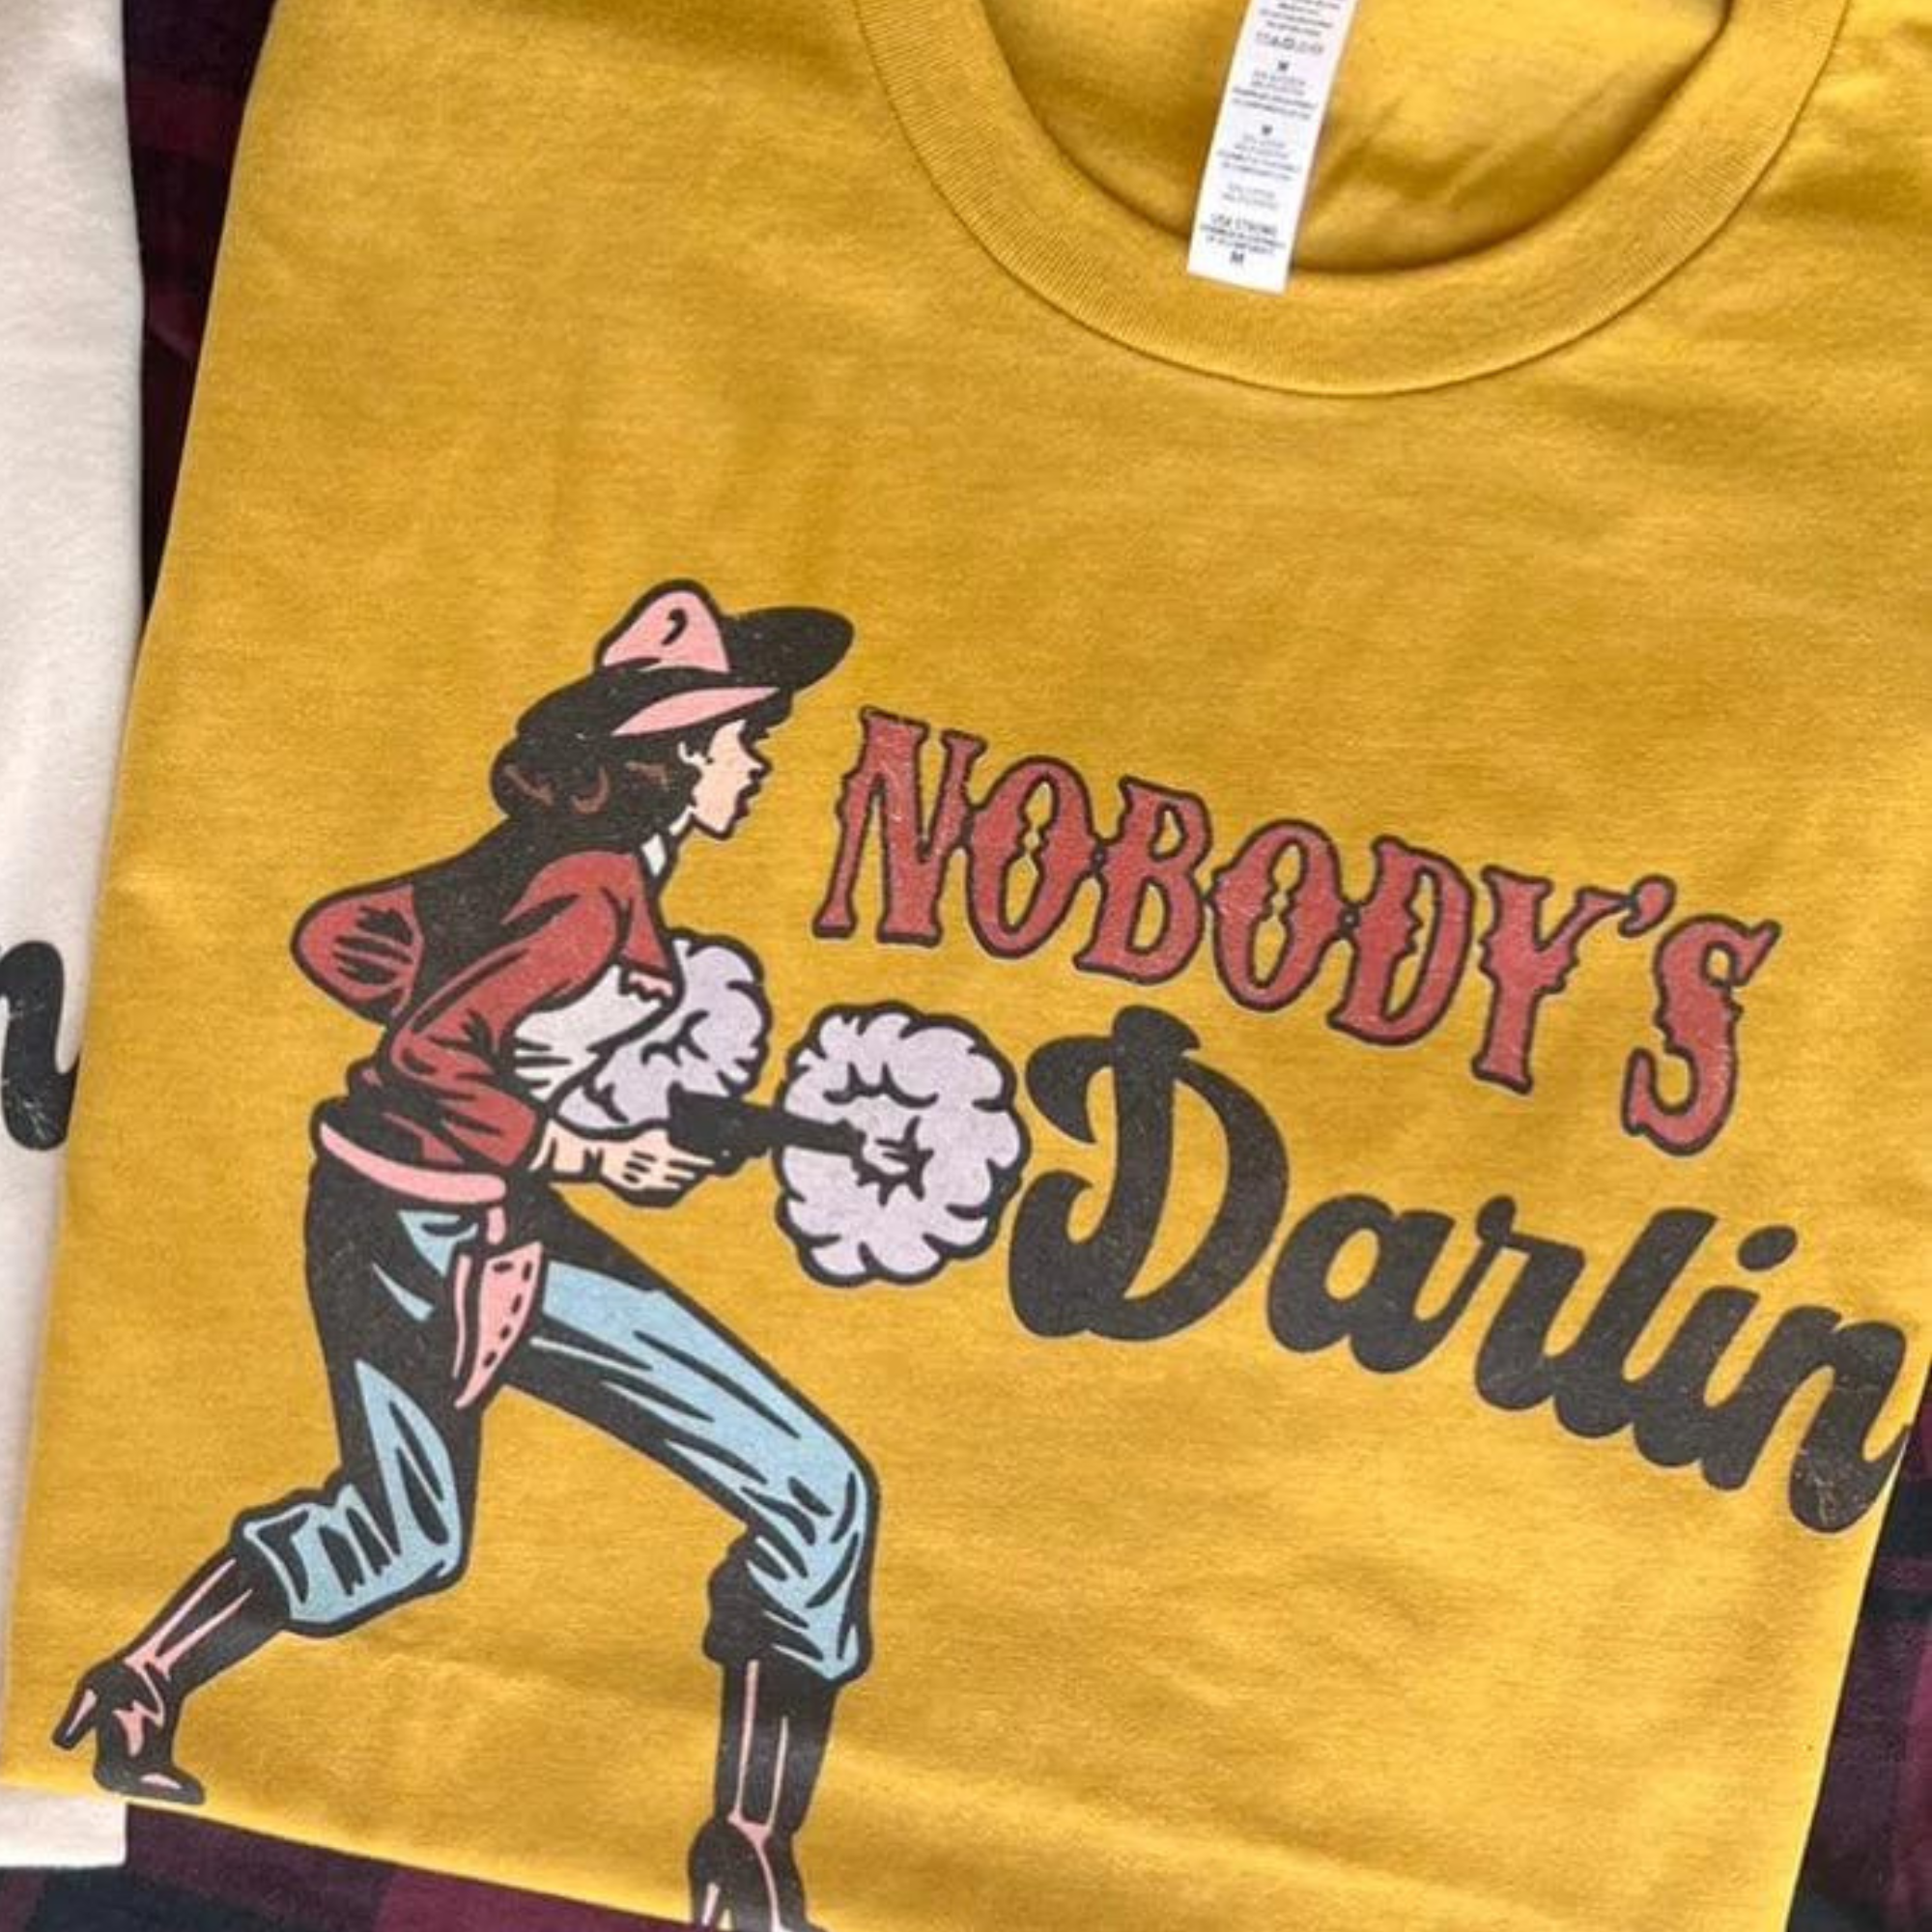 This mustard yellow graphic tee includes a crew neckline, short sleeves, and cute hand drawn design of a cowgirl facing to the side holding pistols and the words "NOBODY'S DARLIN'" in red western font and black cursive. This tee is shown in this photo as a folded flat lay.